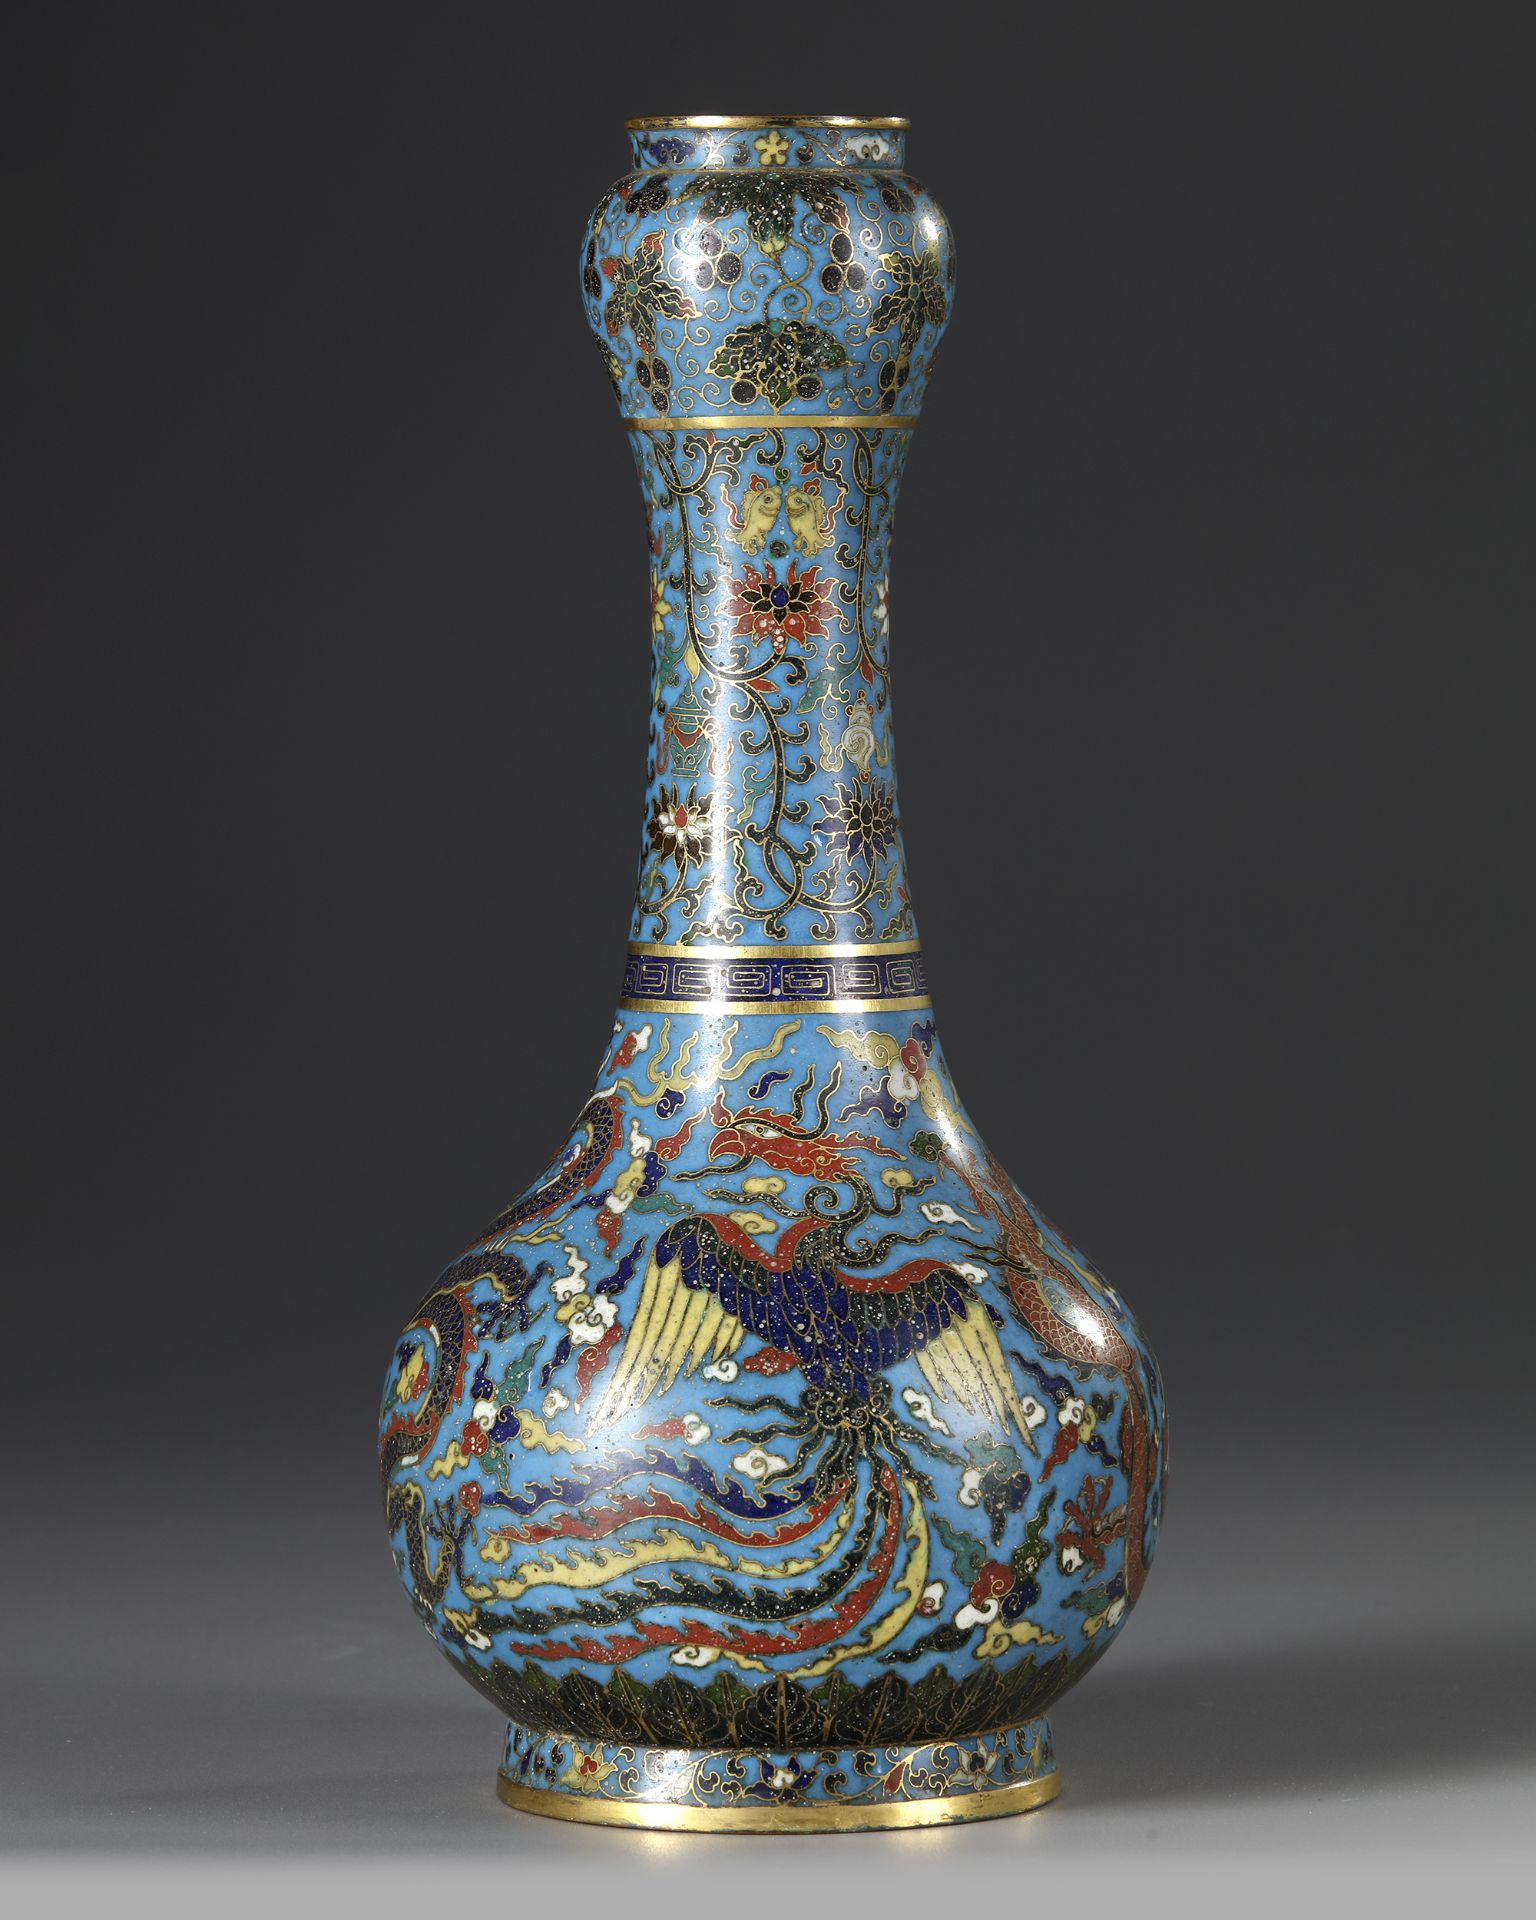 A CHINESE CLOISONNÉ ENAMEL GARLIC HEAD VASE, JINGTAI INCISED SIX-CHARACTER MARK IN A LINE (1450-1456